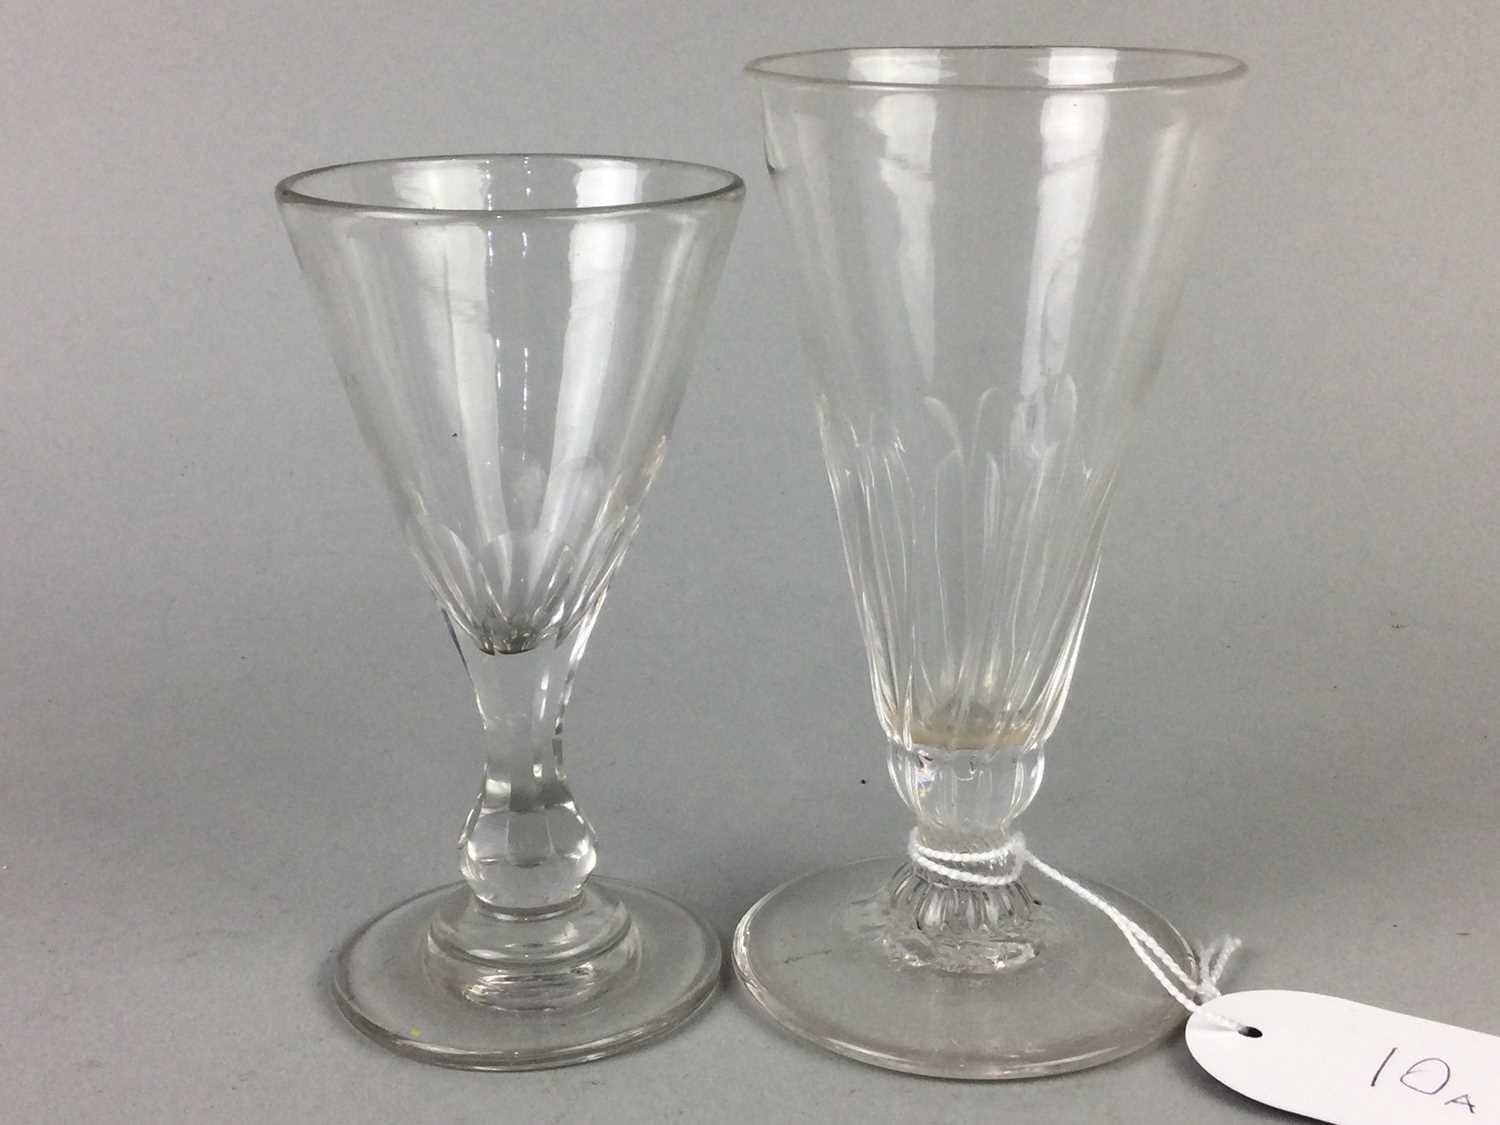 Lot 10 - A GEORGE III HALF ALE GLASS, ALONG WITH A VICTORIAN PORT GLASS